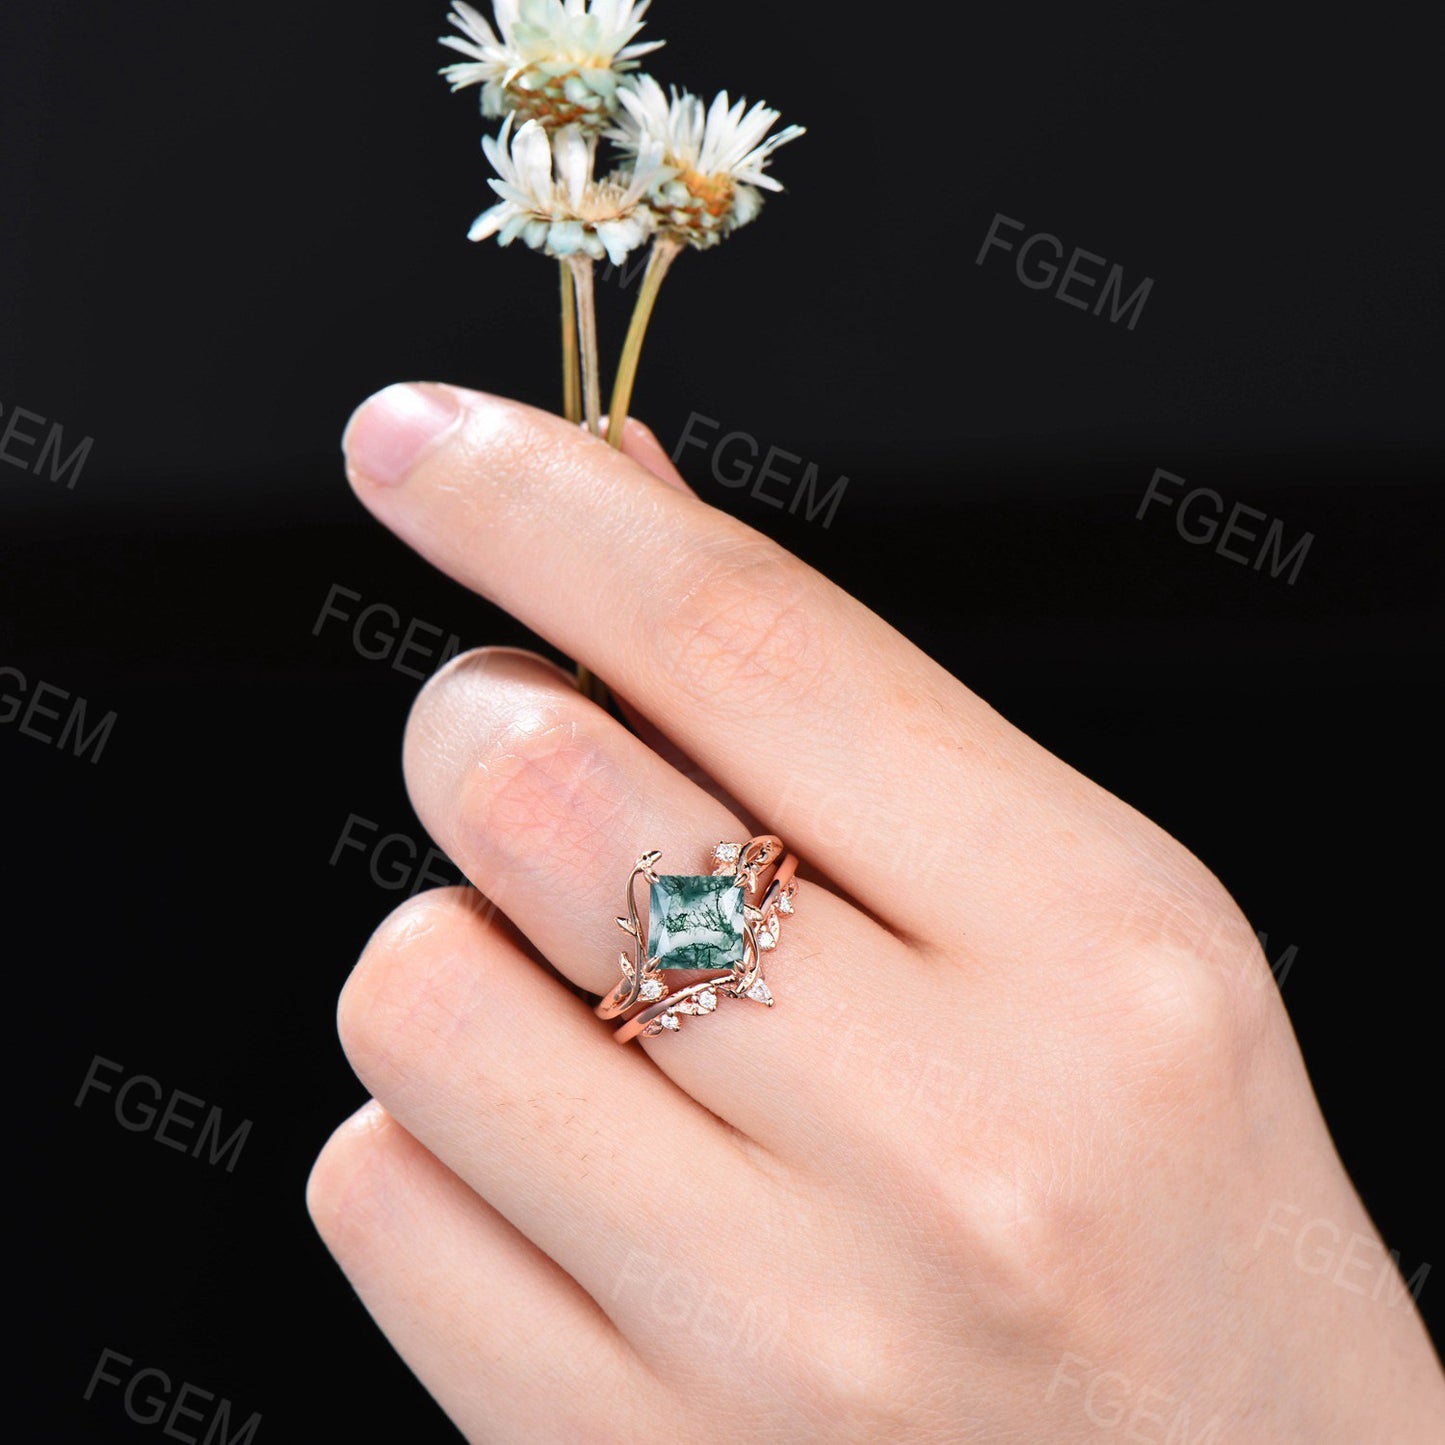 7mm Princess Cut Natural Moss Agate Diamond Ring Set Nature Inspired Green Engagement Rings Rose Gold Moss Agate Leaf Branch Moissanite Wedding Ring